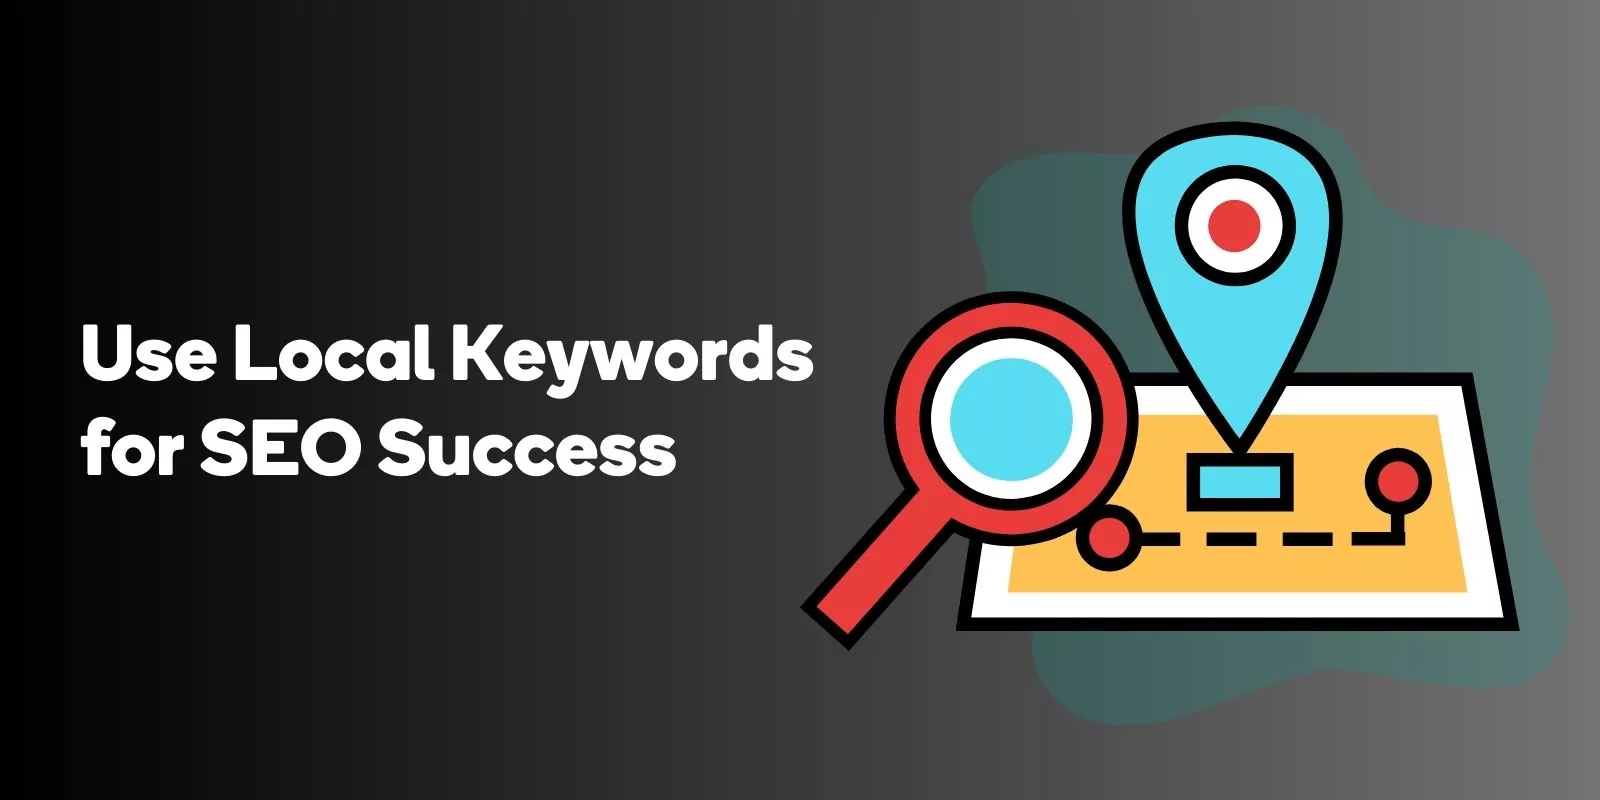 Why and How to Use Local Keywords for SEO Success